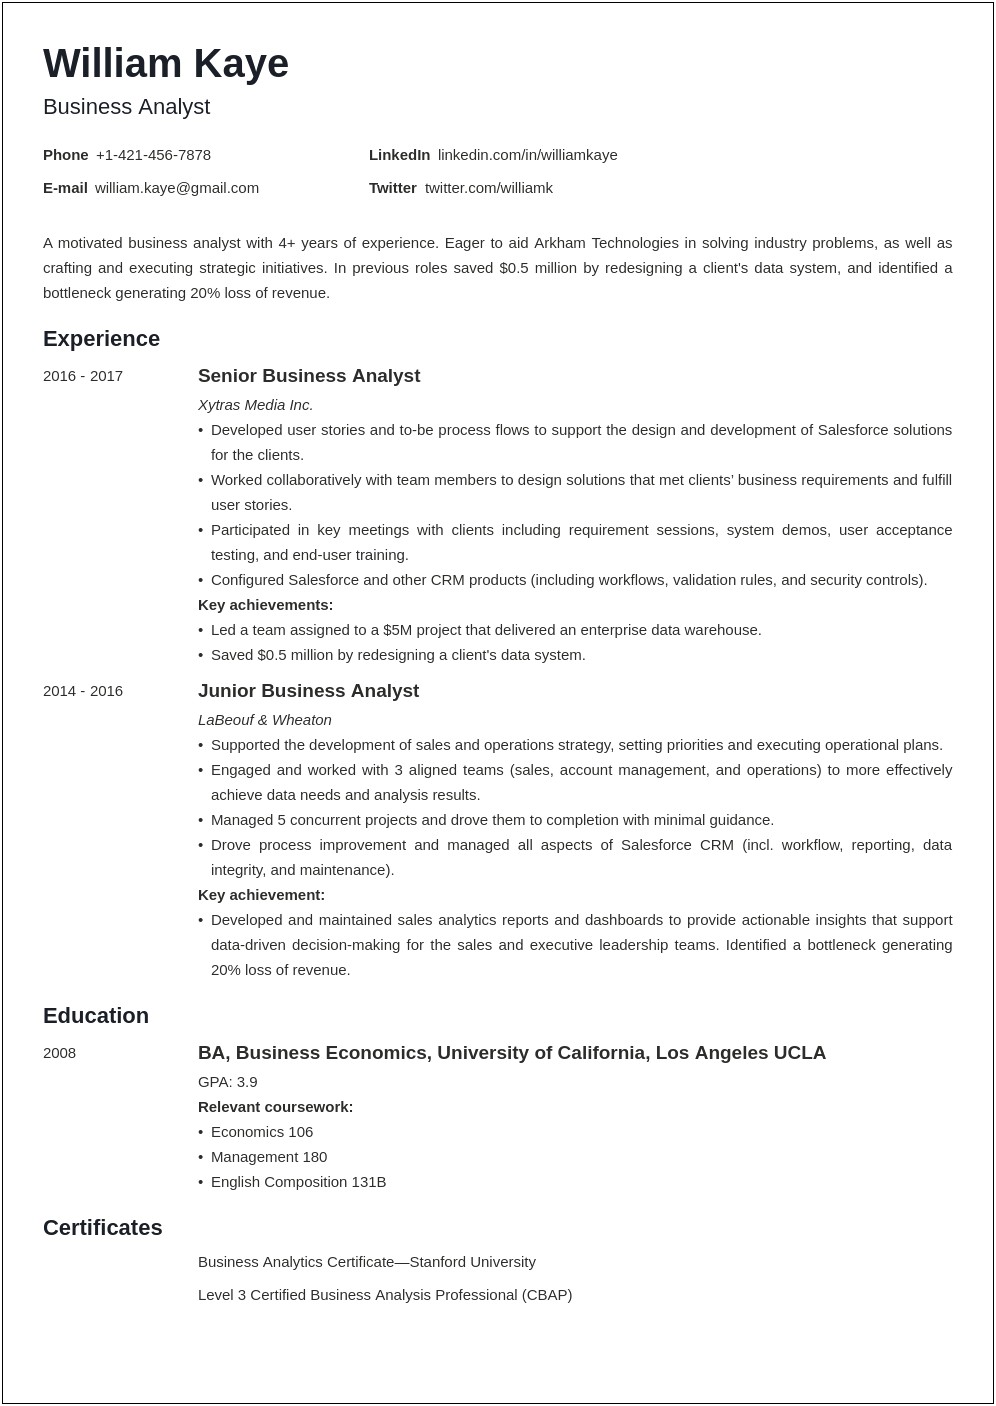 Professional Business Analyst Resume Sample